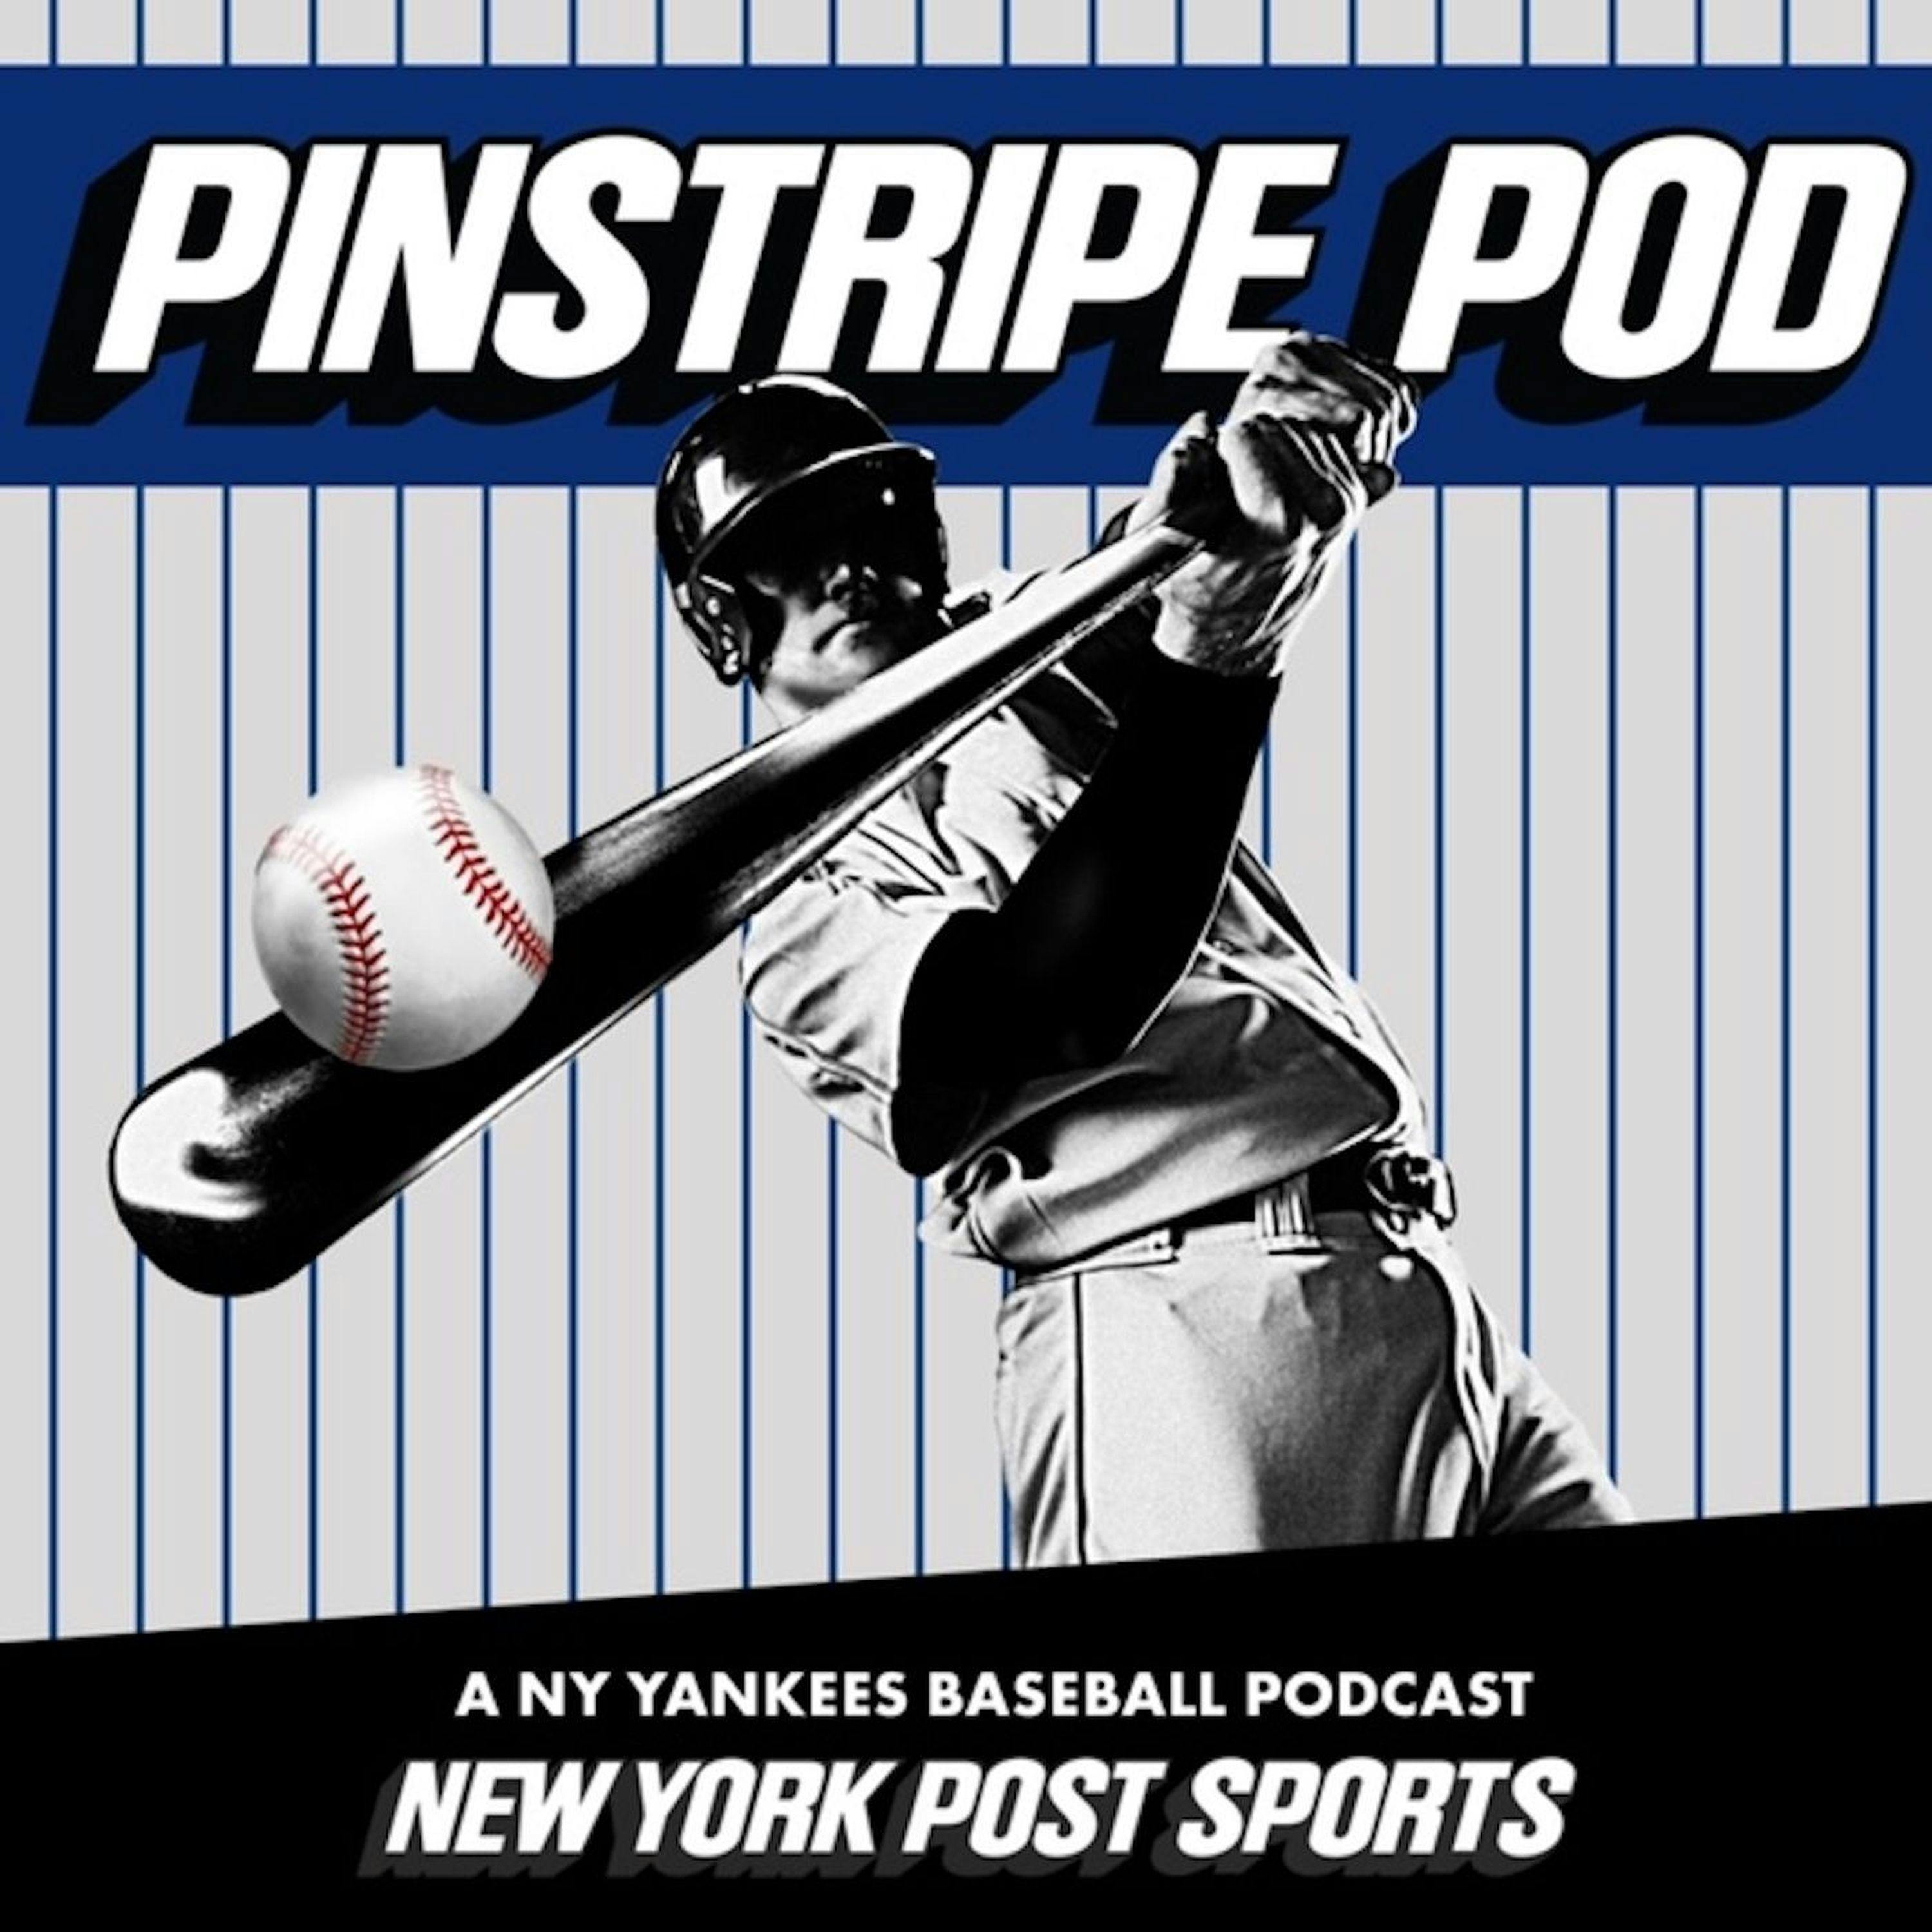 Episode 1: How Yankees Can Survive Injury Crisis feat. Paul O'Neill